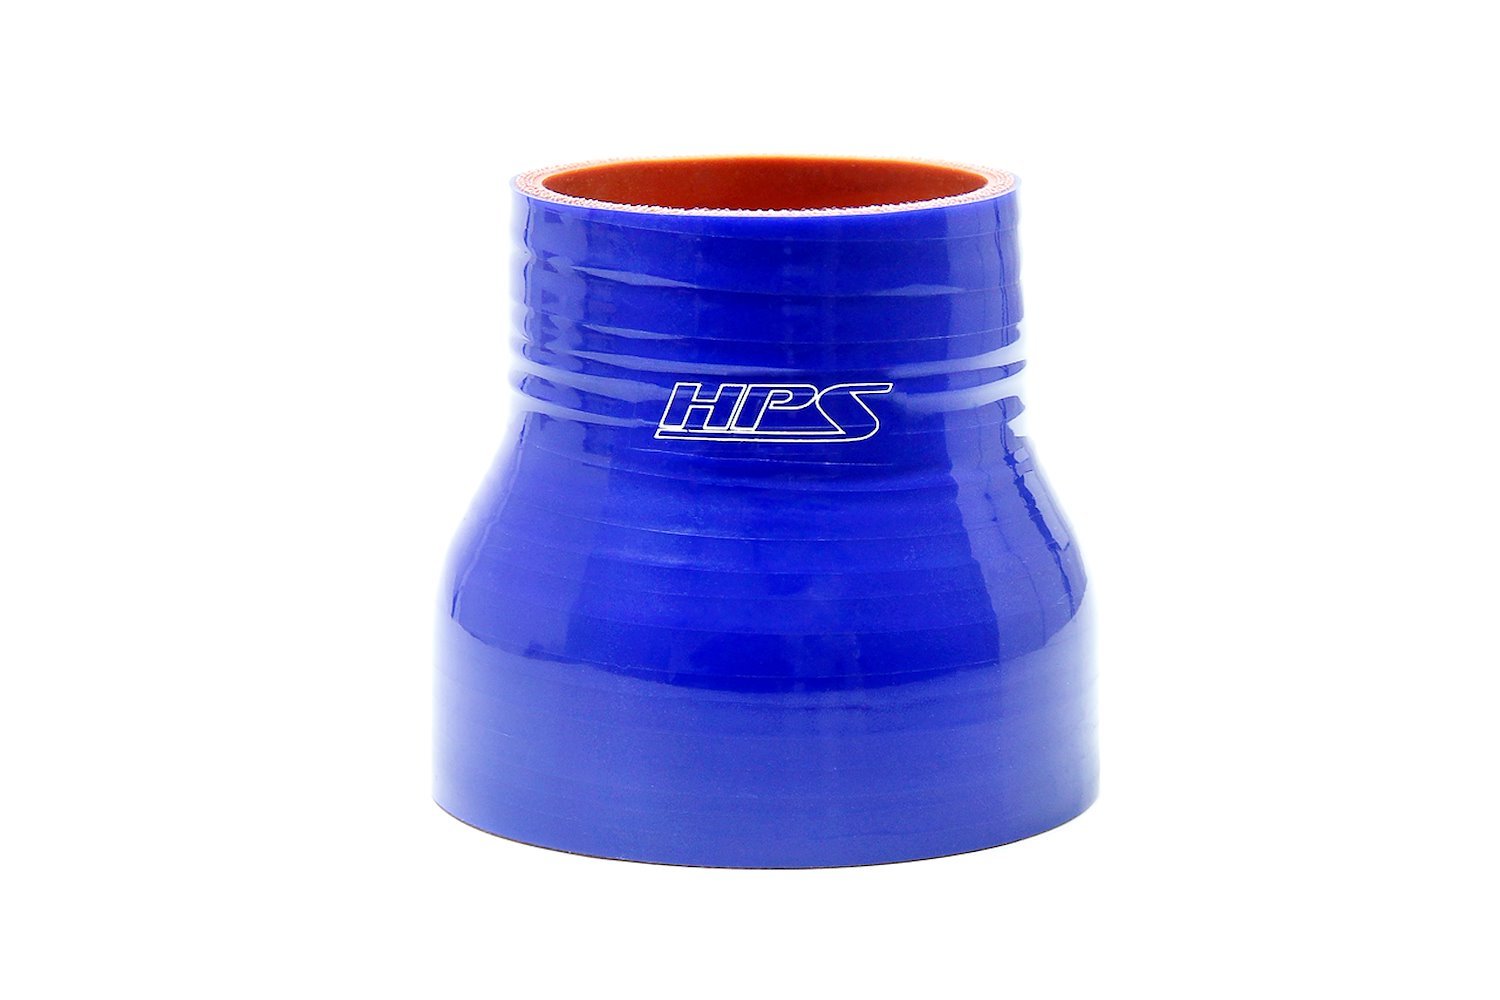 HTSR-300-500-L6-BLUE Silicone Reducer Hose, High-Temp 4-Ply Reinforced, 3 in. - 5 in. ID, 6 in. Long, Blue